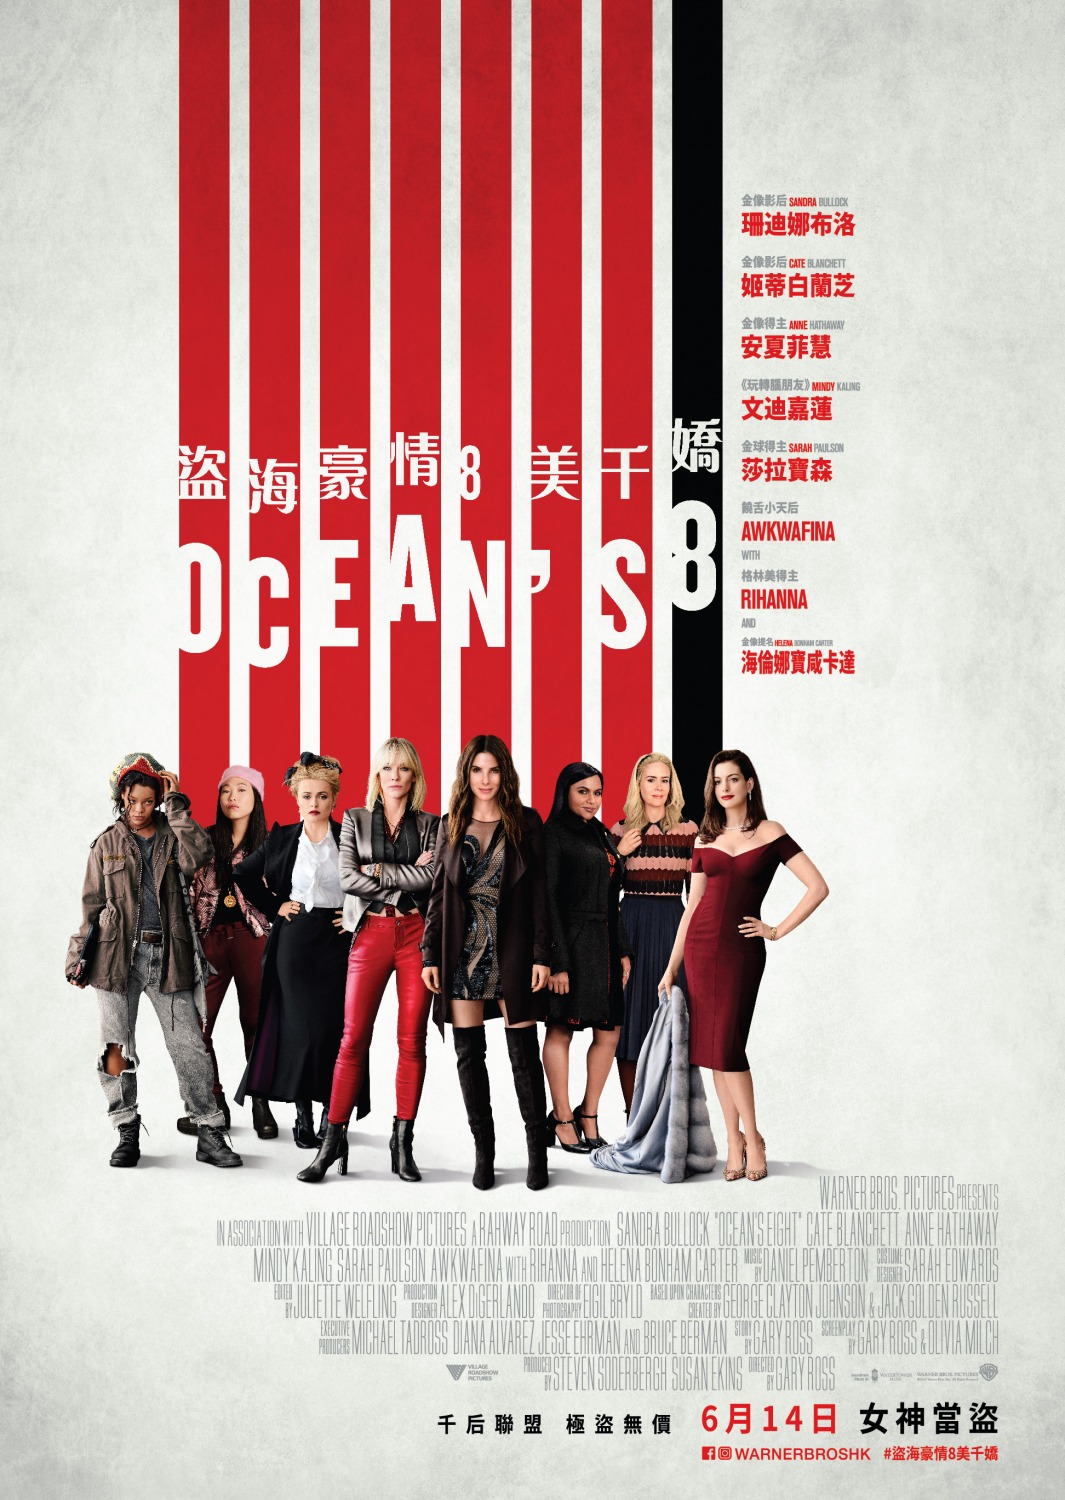 Extra Large Movie Poster Image for Ocean's 8 (#11 of 12)